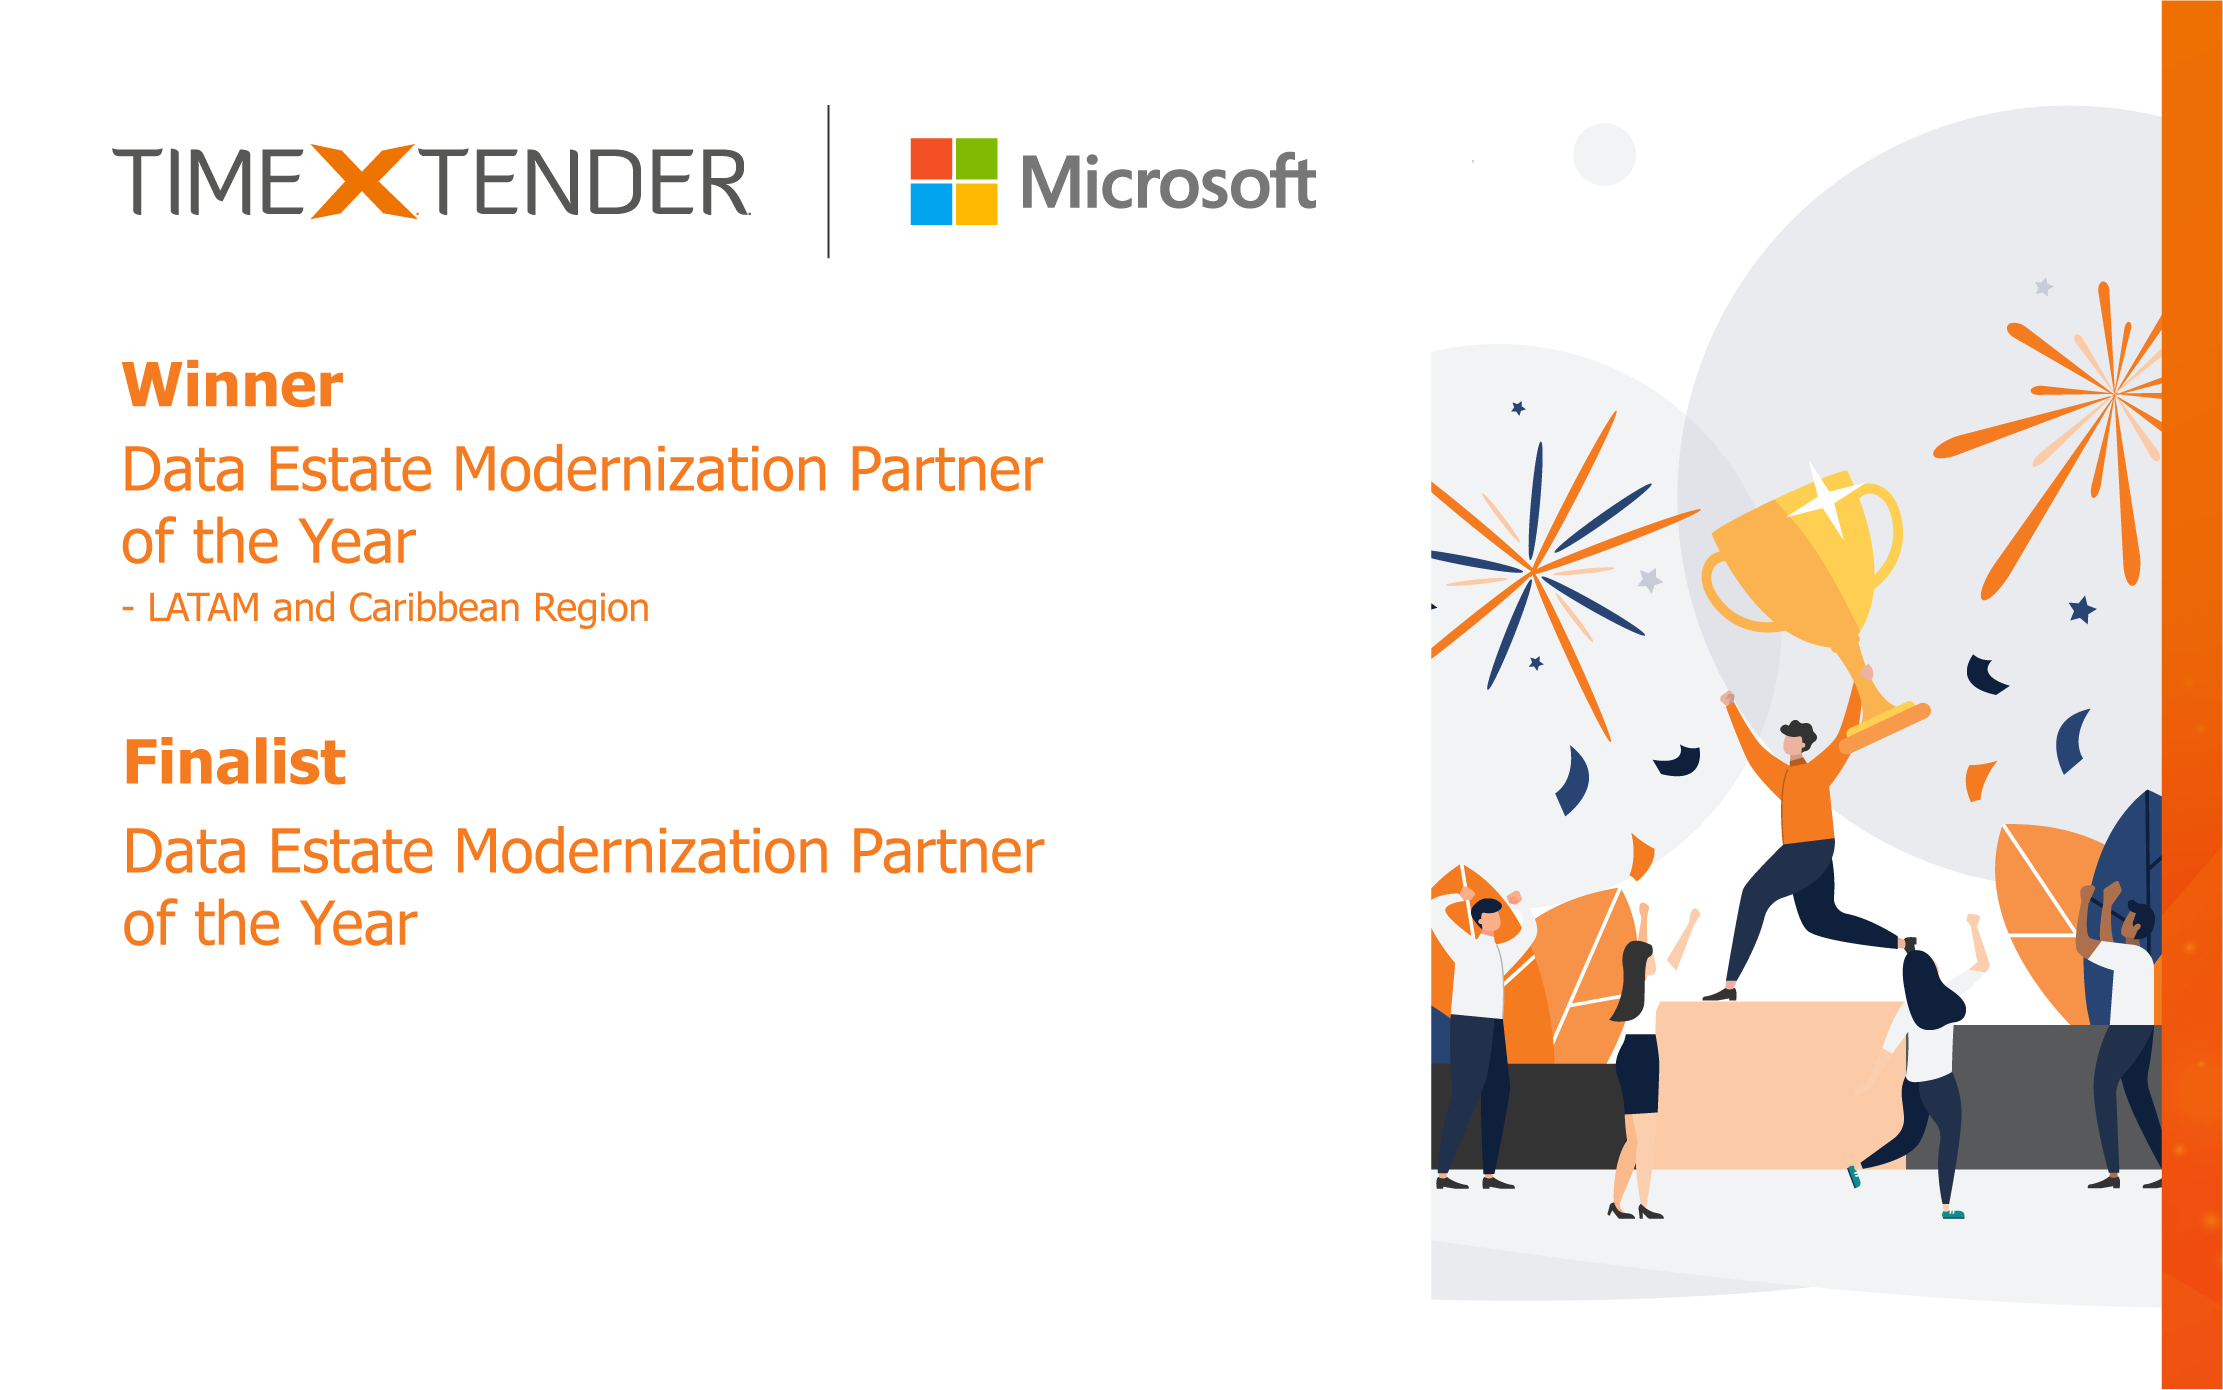 TimeXtender wins 2 Microsoft 2020 Partner of the Year Awards